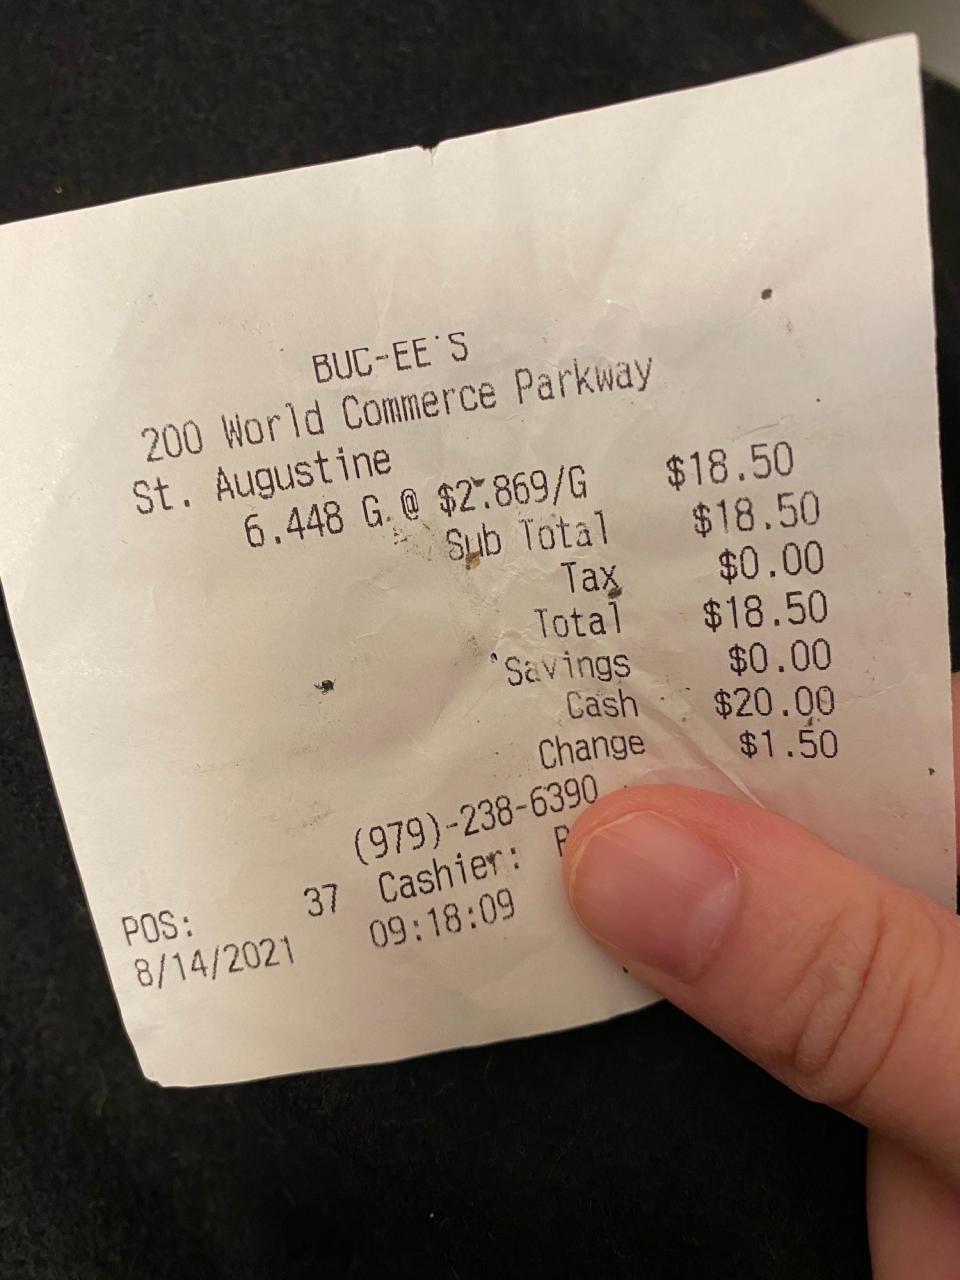 A gas receipt from Buc-ee's in Florida.